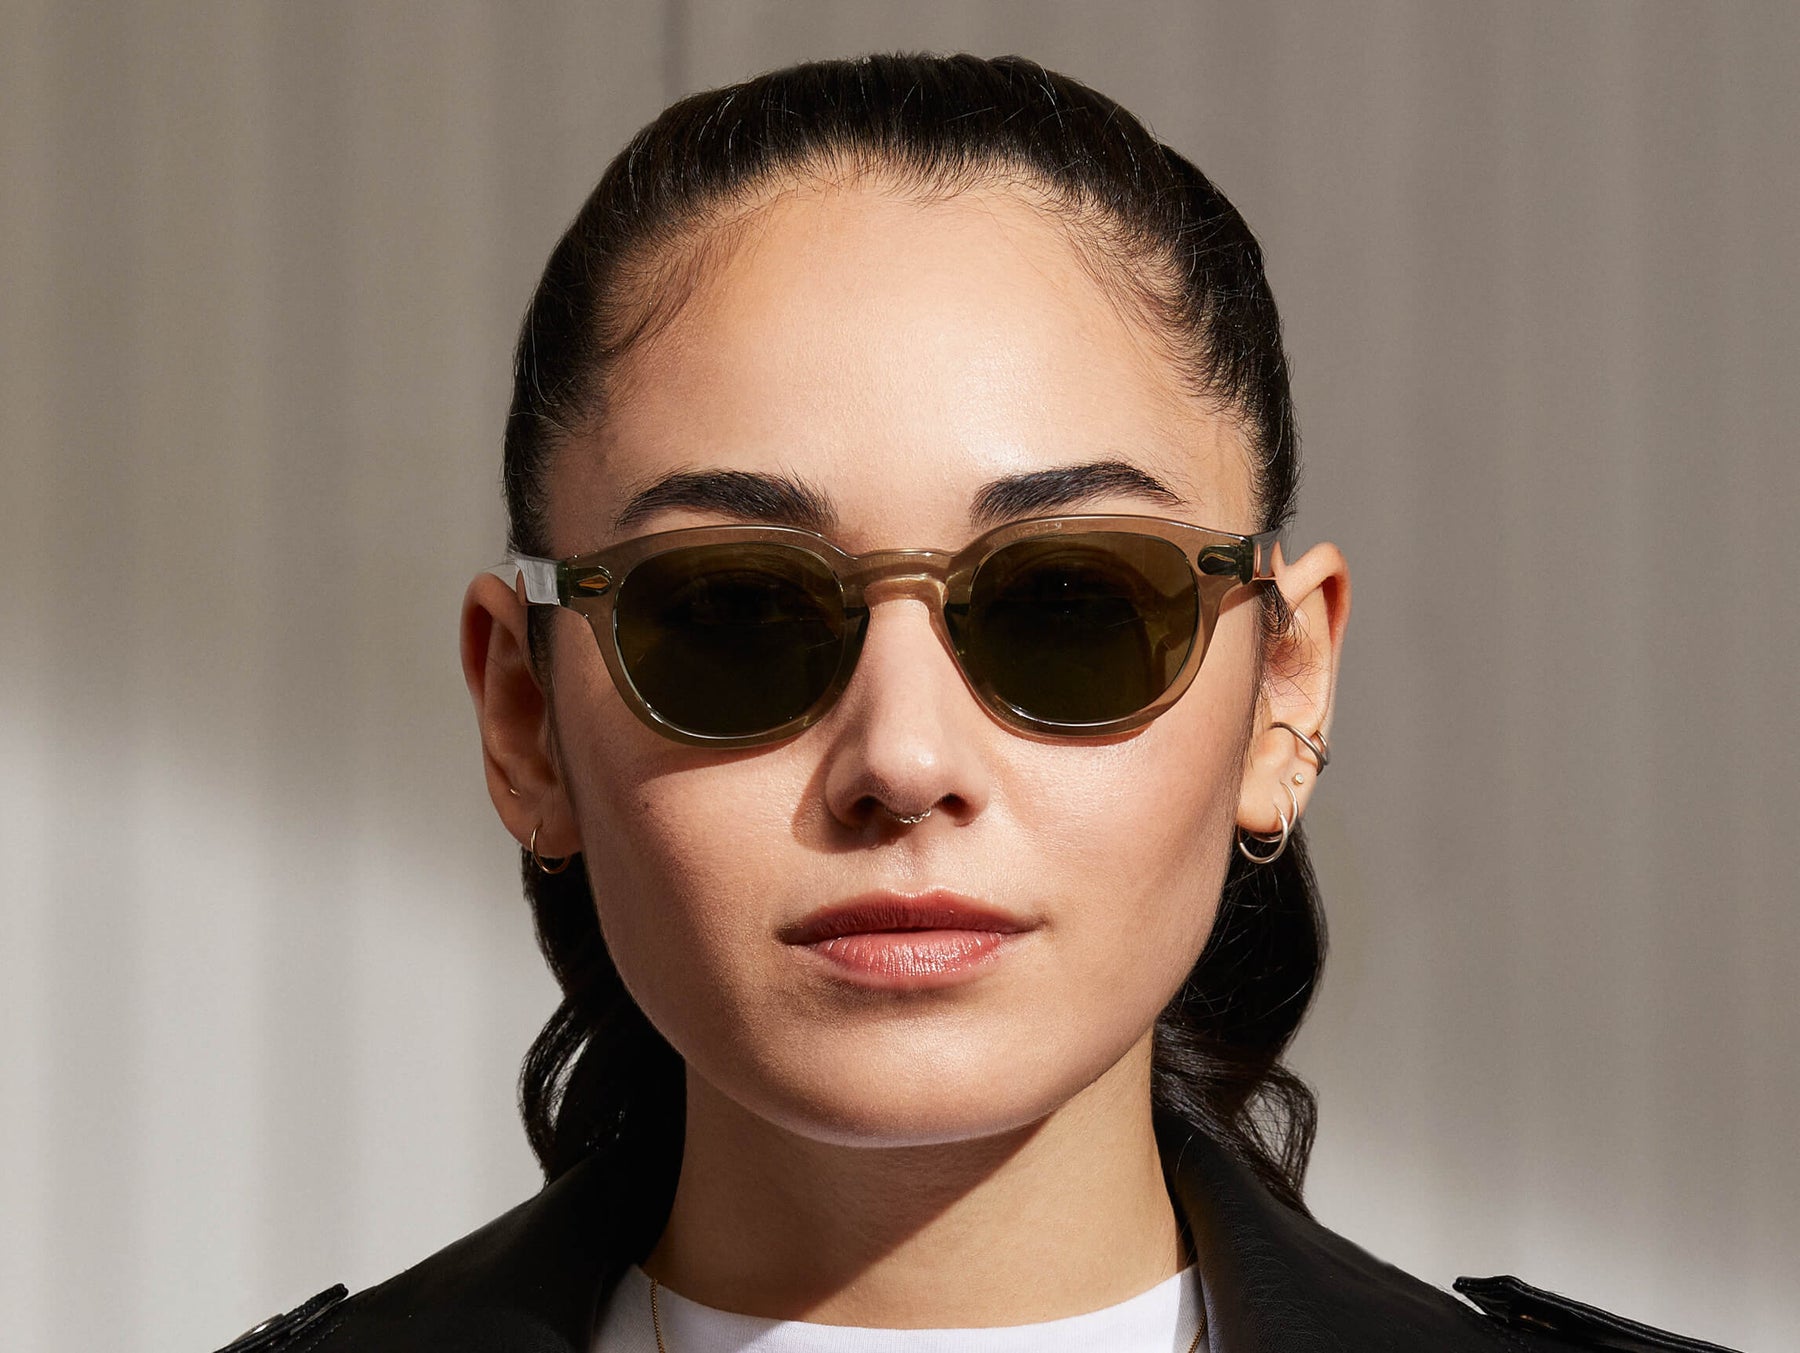 Model is wearing The LEMTOSH SUN in Sage in size 44 with G-15 Glass Lenses